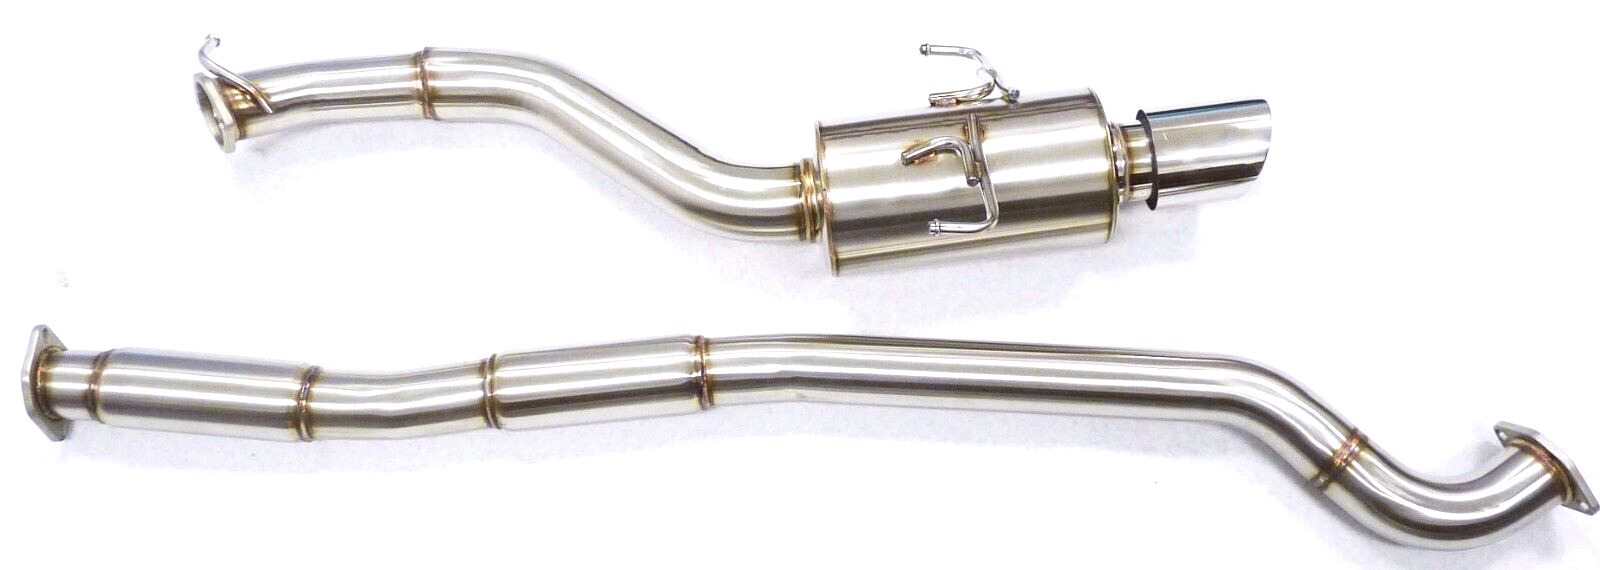 OBX-RS Catback Exhaust Fits 1998-03 Subaru Legacy Touring/Wagon/GT 2.5L